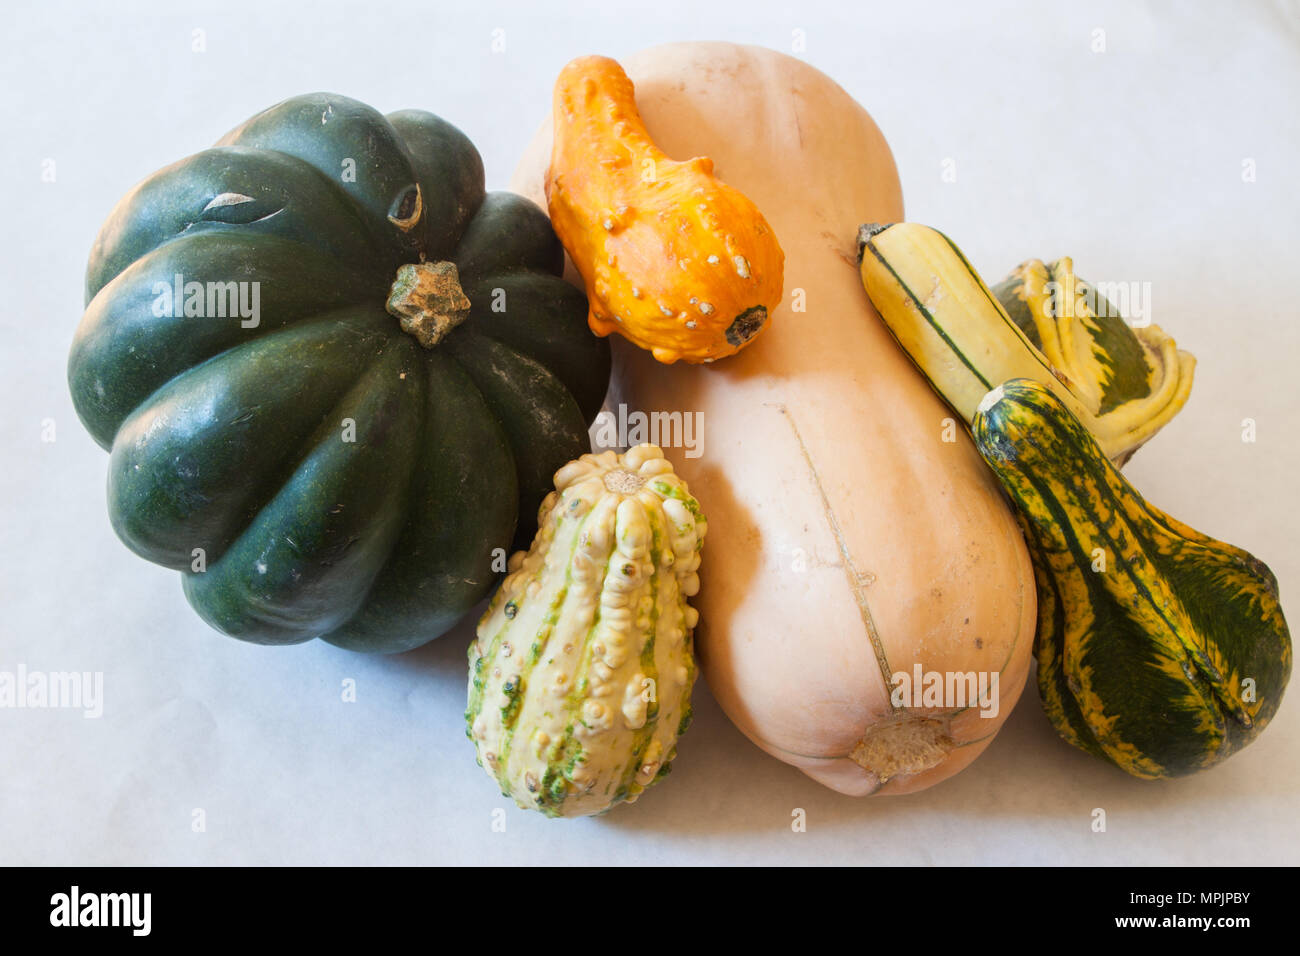 A still life of winter squash and ornamental gourds represents a bountiful harvest Stock Photo